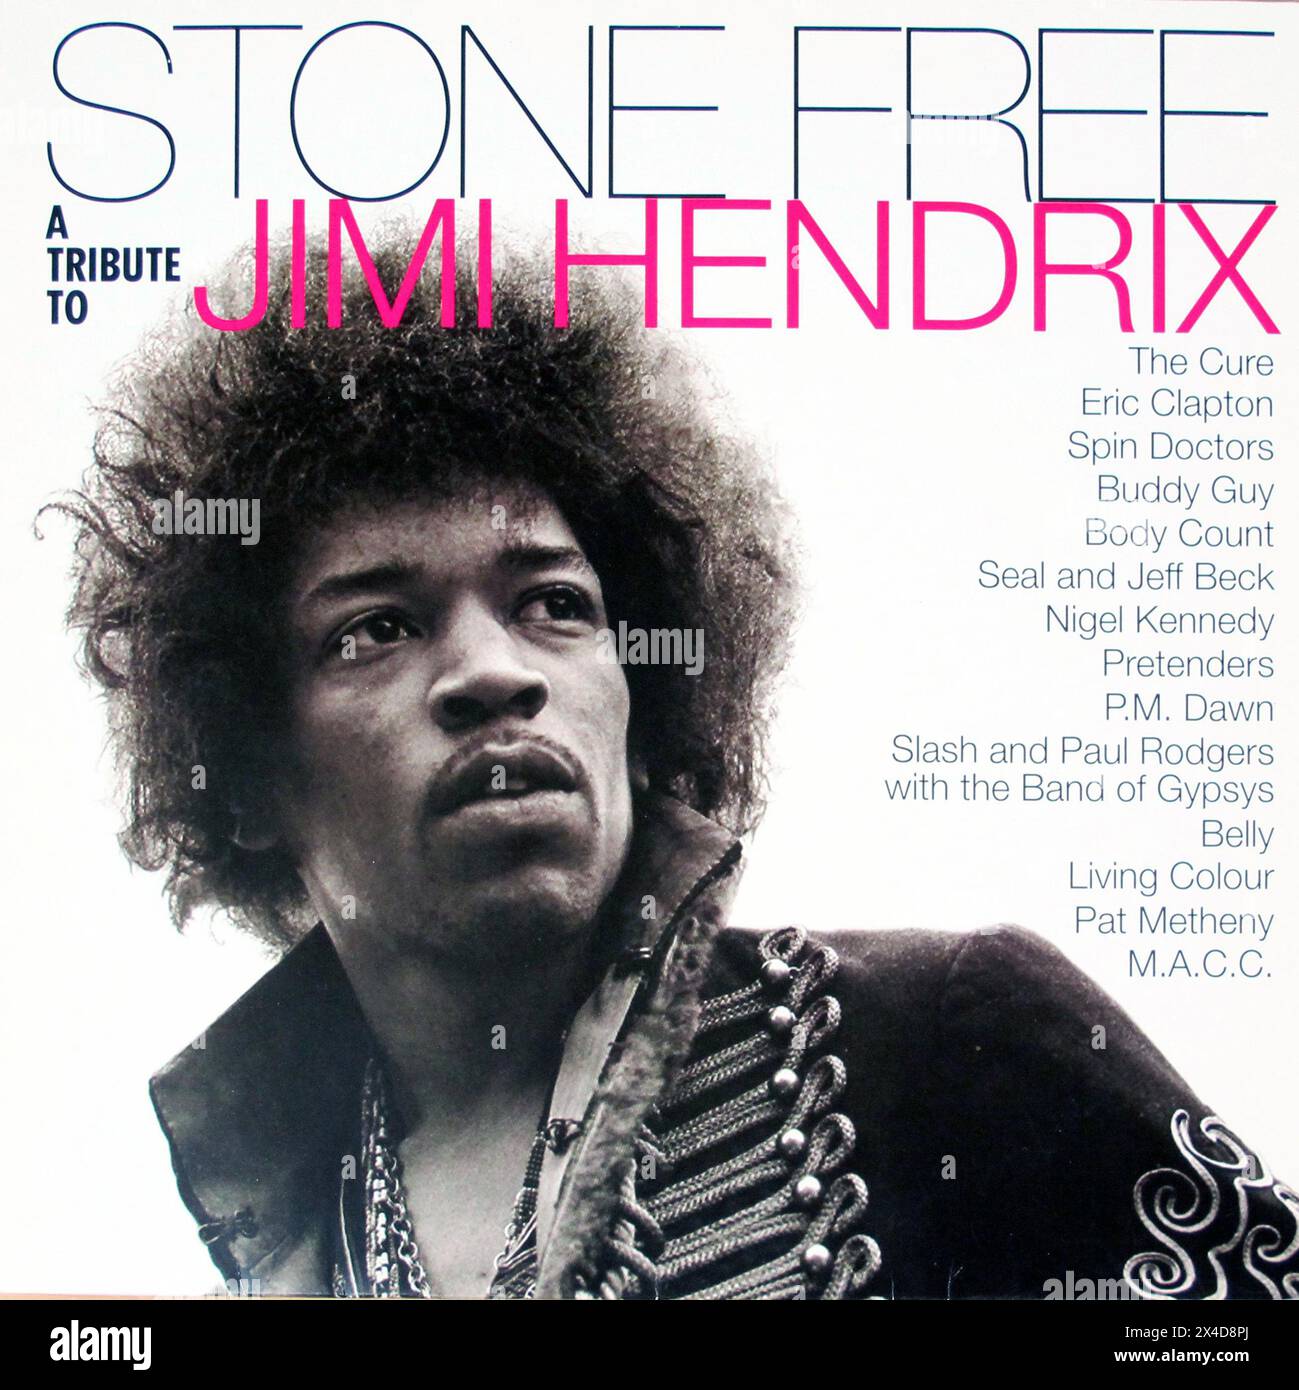 STONE FREE A TRIBUTE TO JIMI HENDRIX    The Cure Eric Clapton Spin Doctors Buddy Guy Body Count Seal and Jeff Beck Nigel Kennedy Pretenders P.M. Dawn Slash and Paul Rodgers with the Band of Gypsys Belly Living Colour Pat Metheny M.A.C.C.   - Vintage vinyl record cover Stock Photo